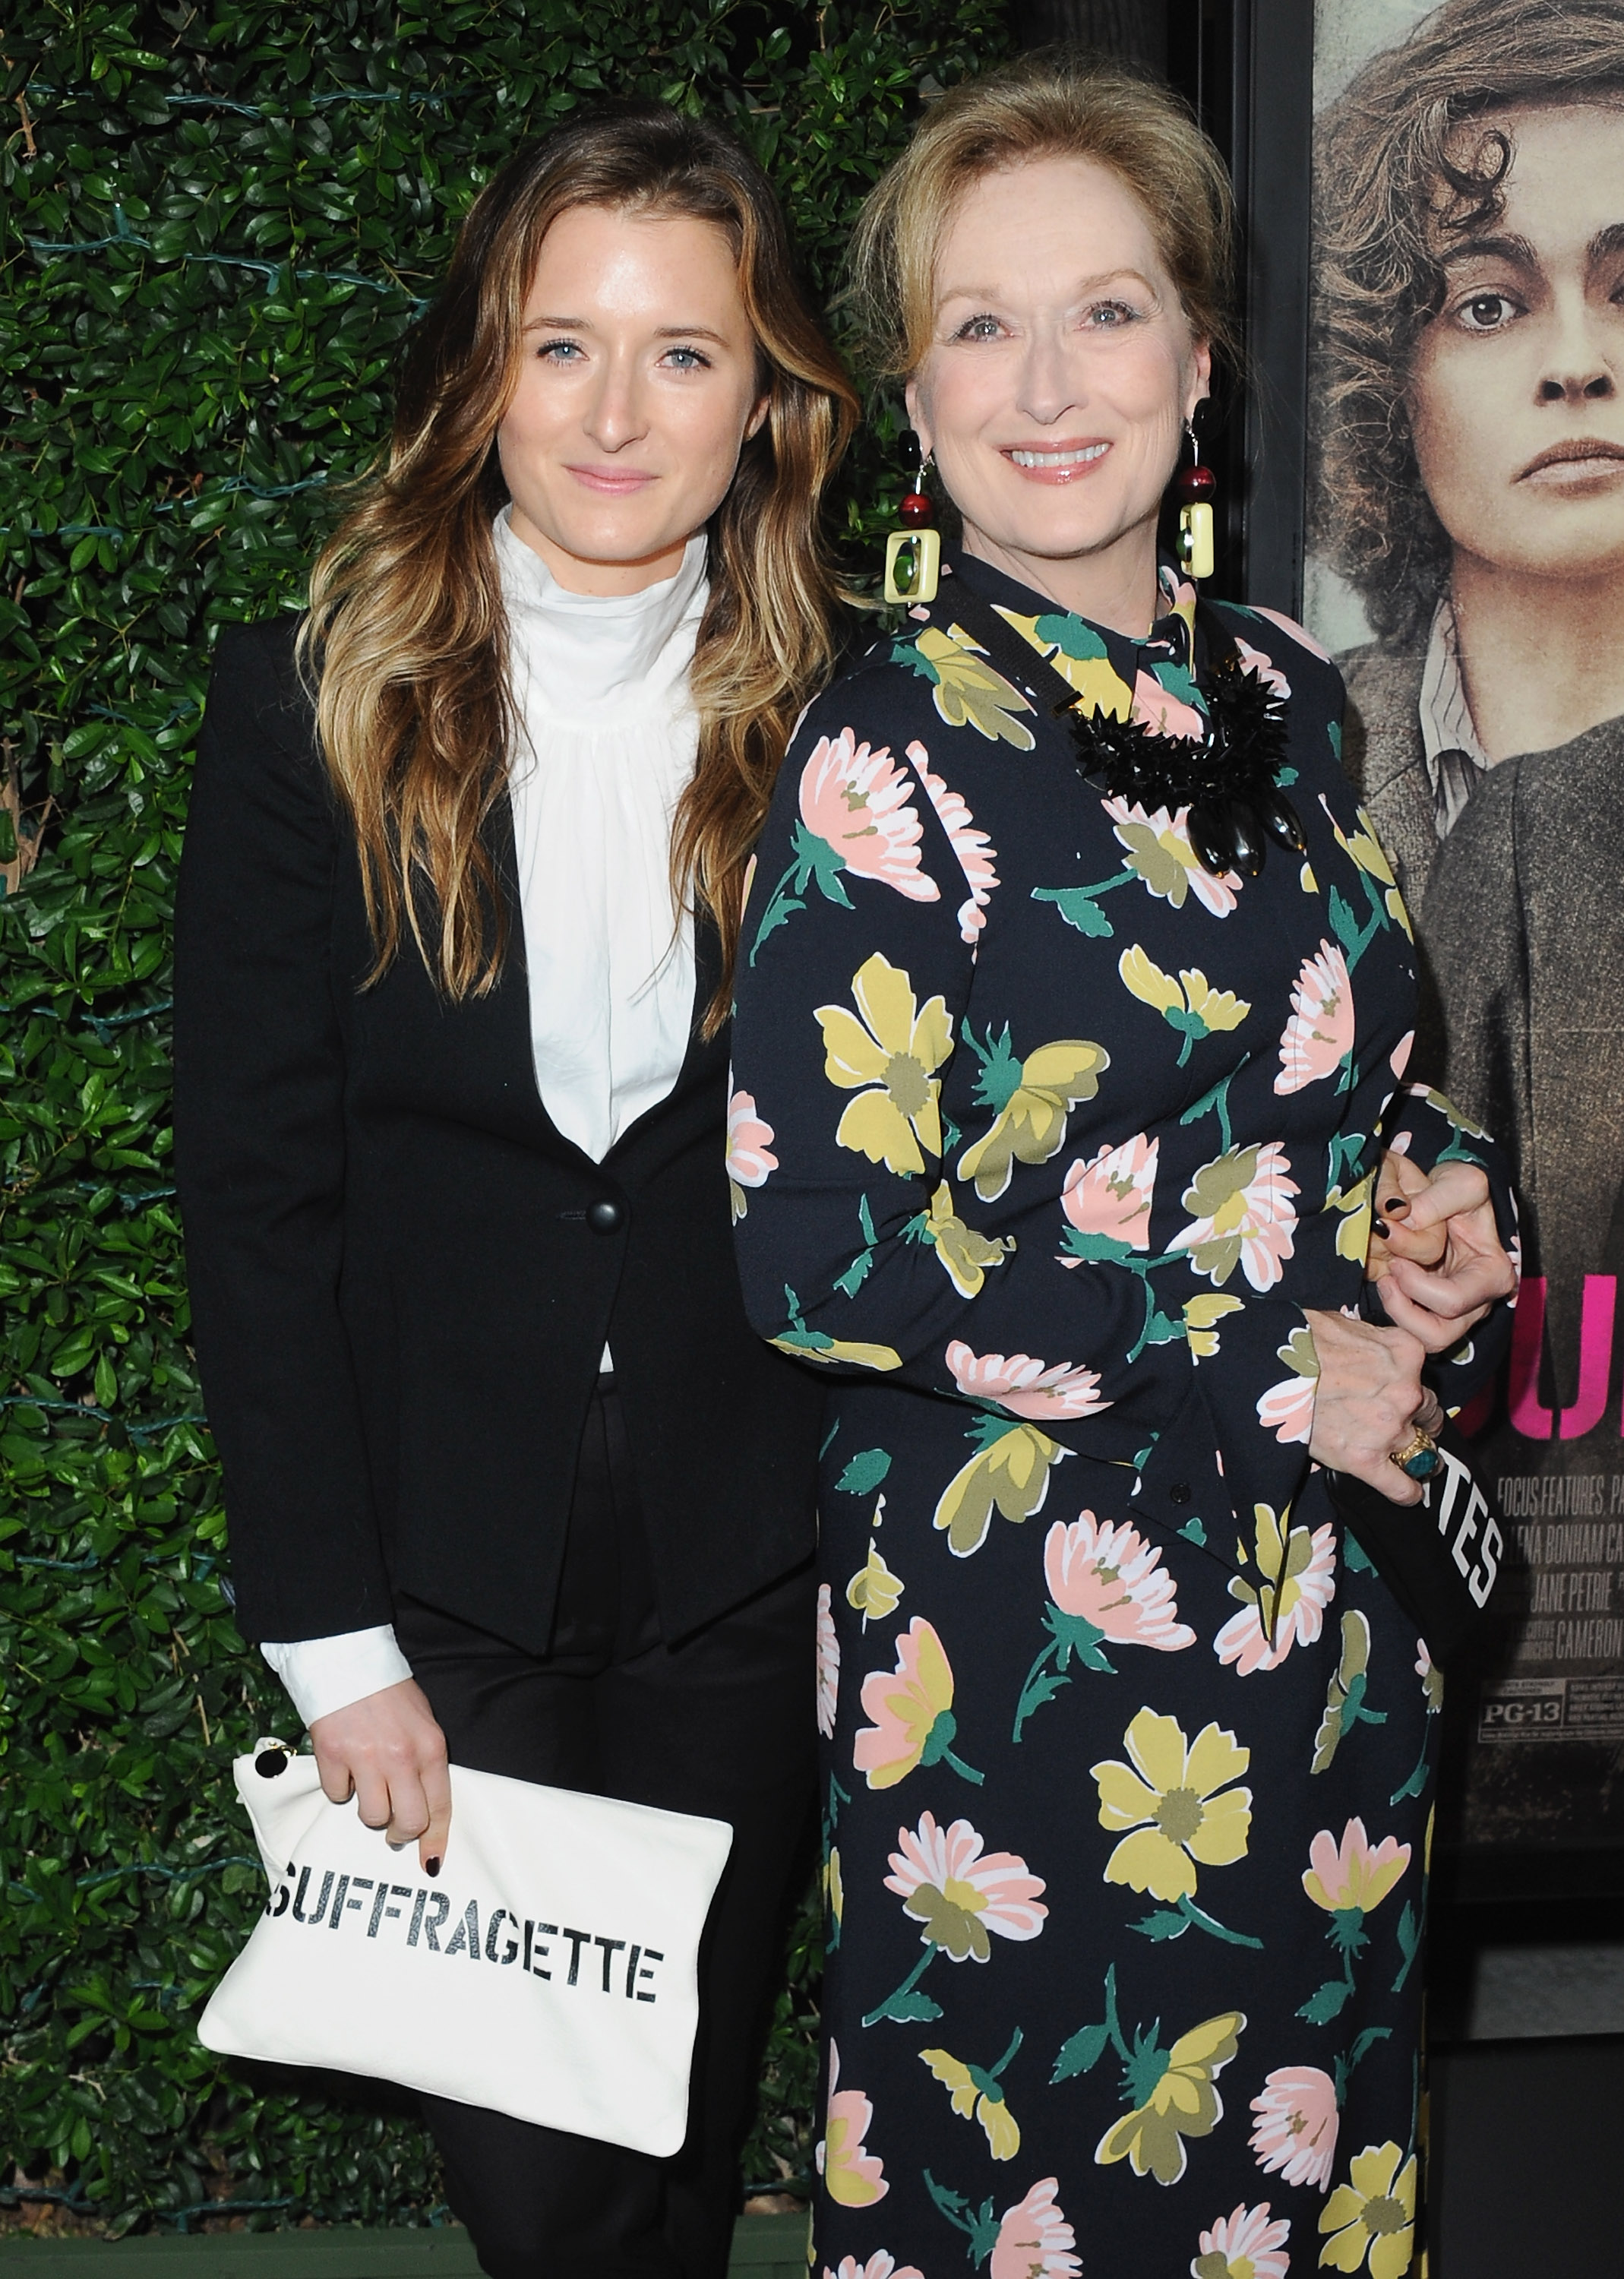 Grace Gummer and Meryl Streep at the "Suffragette" premiere on October 20, 2015 in Beverly Hills, California | Source: Getty Images